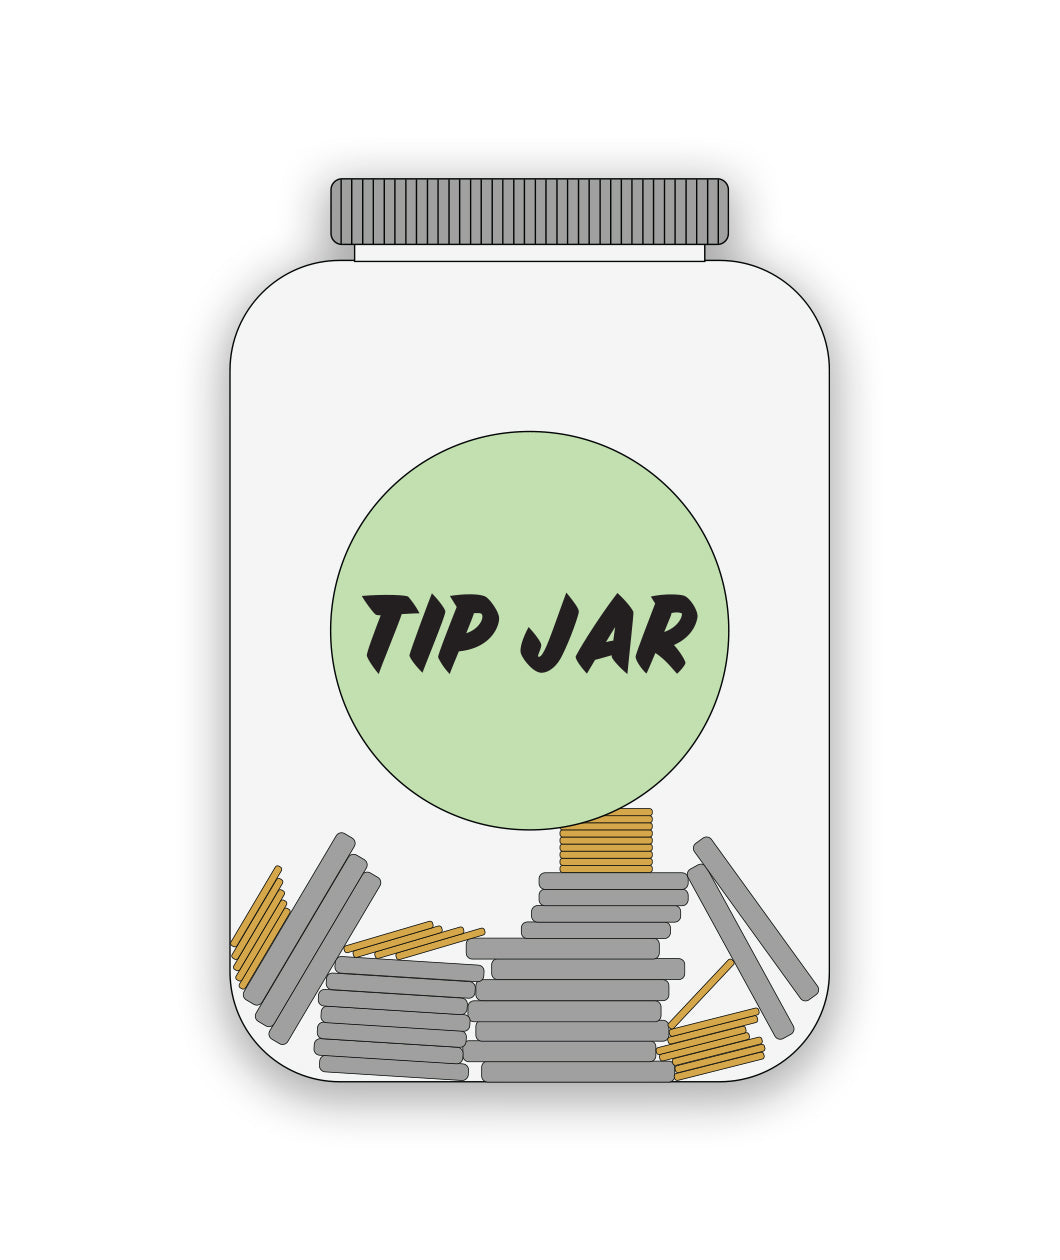 An illustration of a jar with a lid, filled with coins. There is a green circular label on the jar that says 